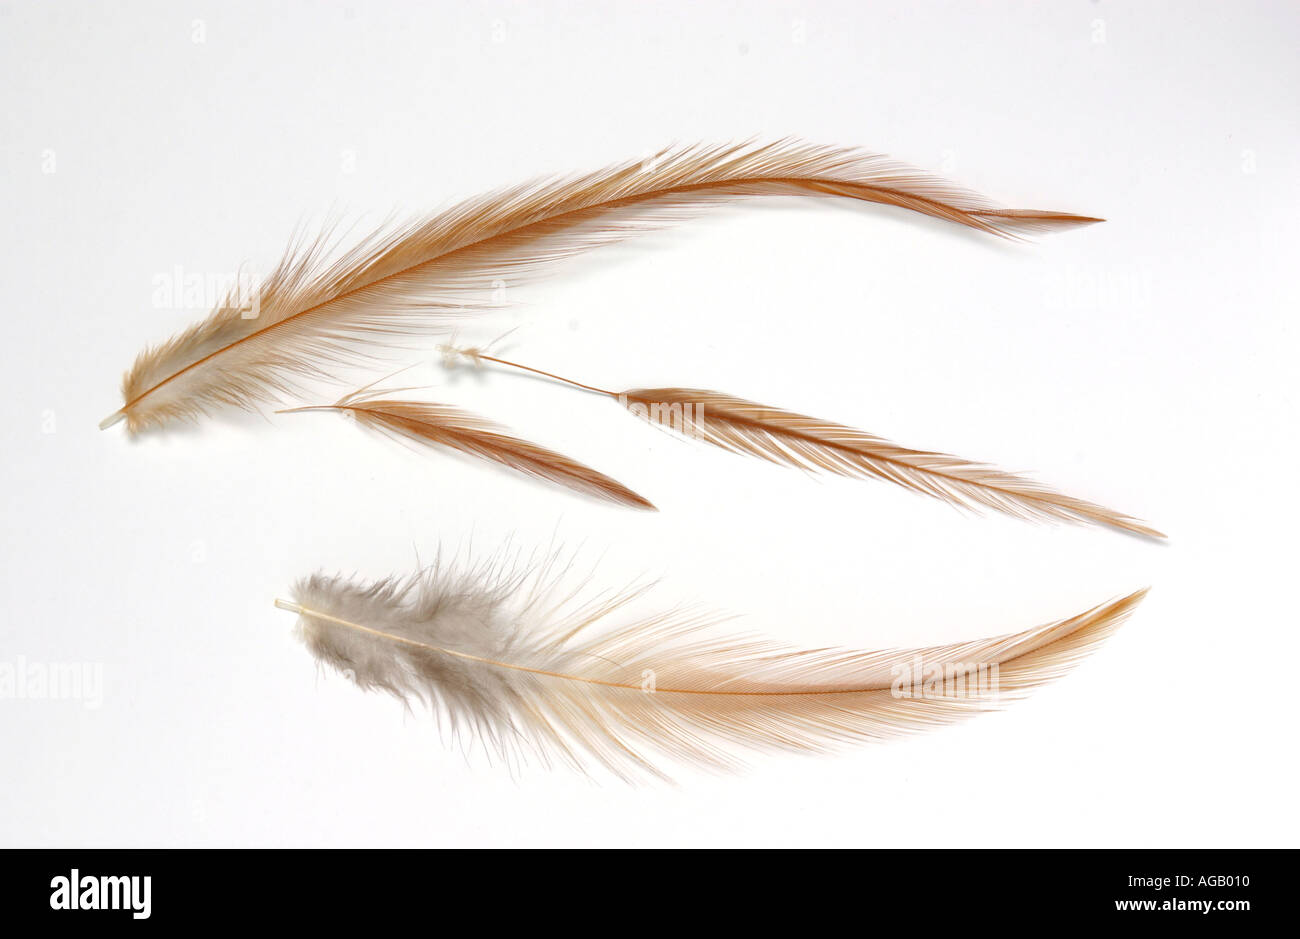 fishing fly Hackle feathers Trout fly tying material Stock Photo